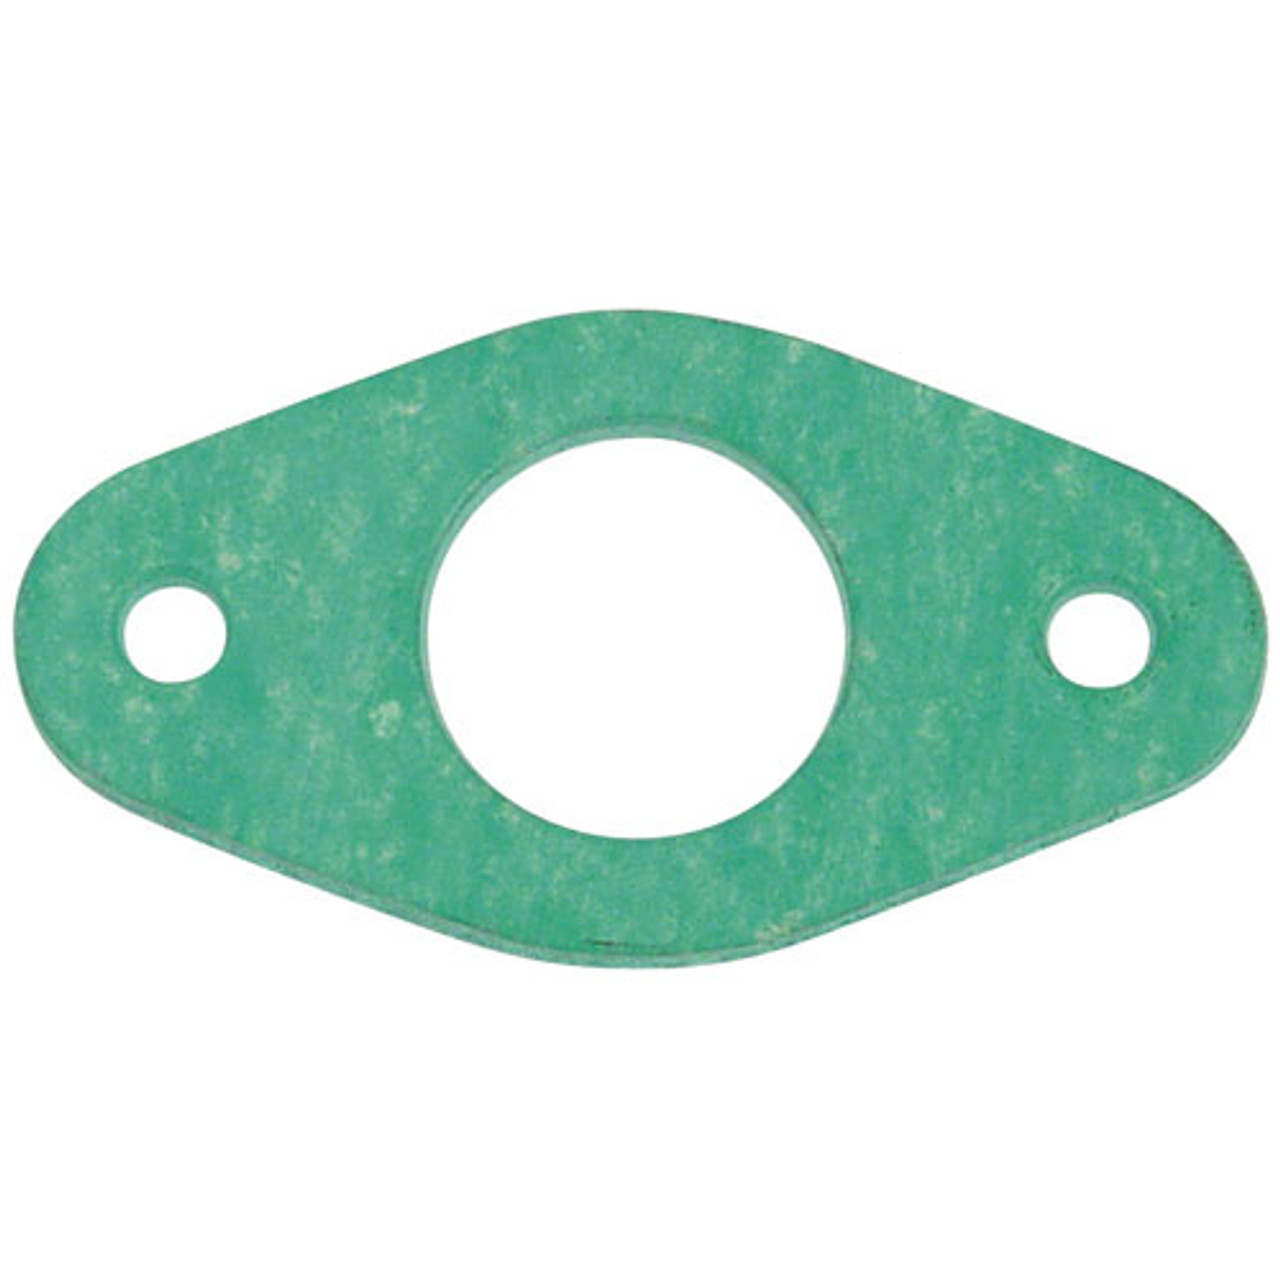 Burner Gasket 2-11/16" X 1-1/2" - Replacement Part For Garland 4521321